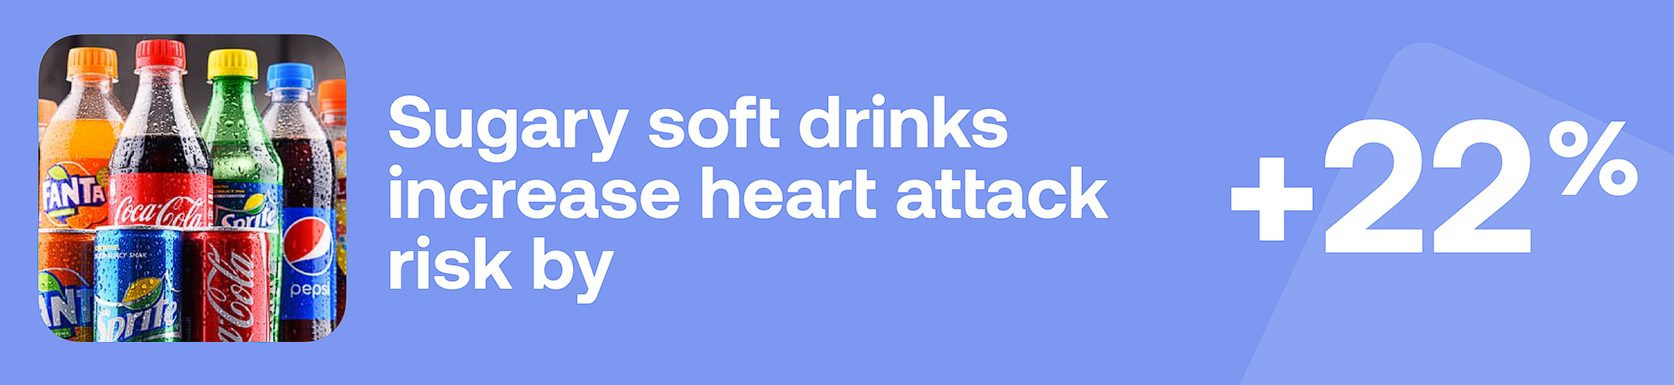 Sugary soft drinks increase heart attack risk by +22%